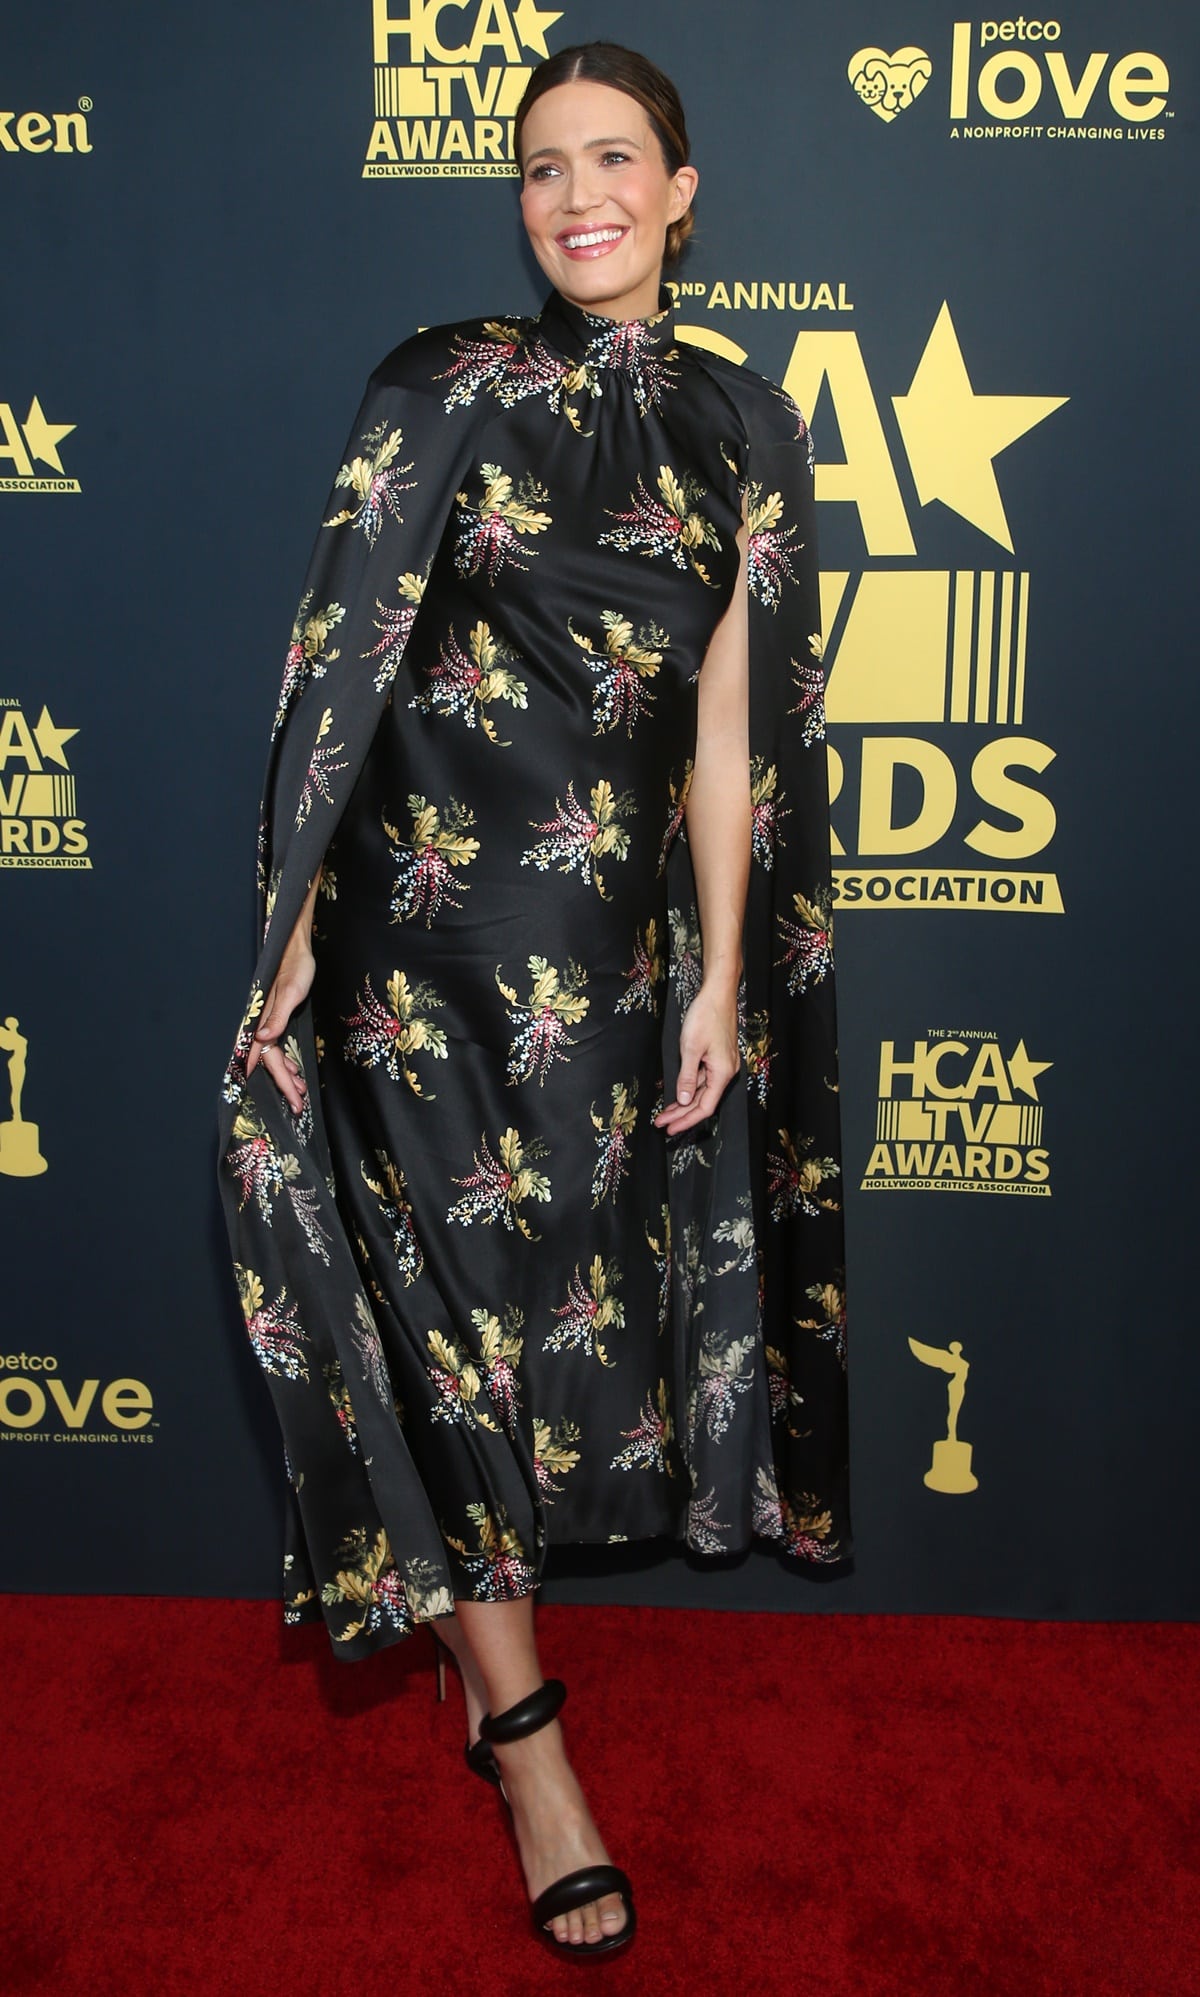 Mandy Moore displayed her style in a black silk dress with elegant floral patterns and caped sleeves at the 2nd Annual HCA TV Awards